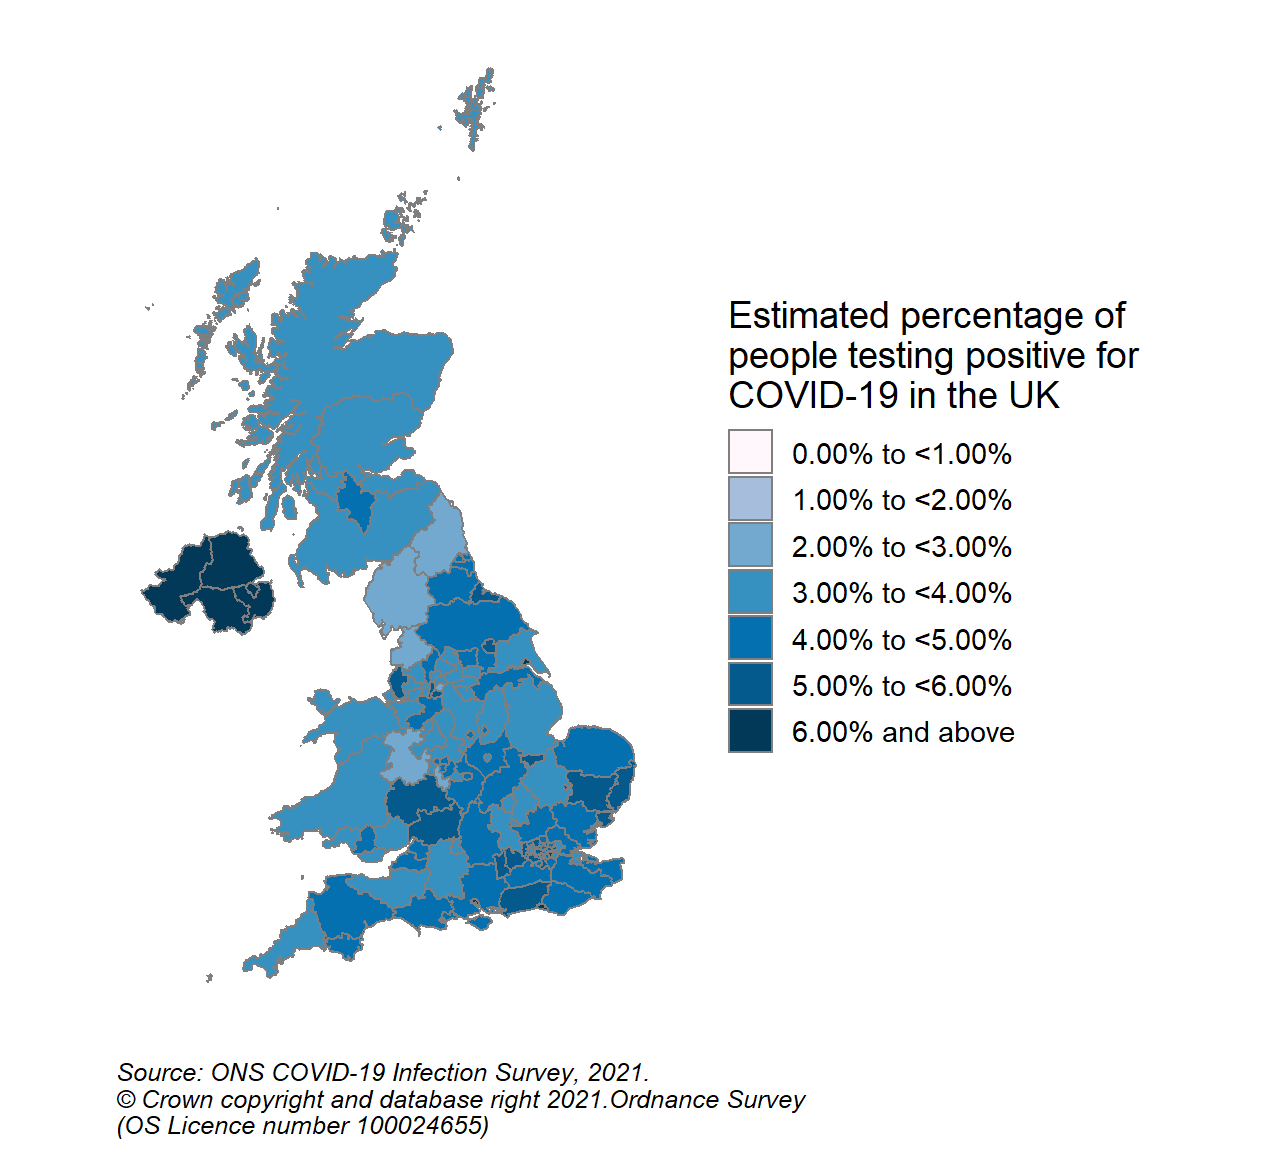 This colour coded map of the UK shows the modelled estimates of the percentage of the private residential population testing positive for COVID-19, by COVID-19 Infection Survey sub-regions. In Scotland, these sub-regions are comprised of Health Boards. The regions are: 123 - NHS Grampian, NHS Highland, NHS Orkney, NHS Shetland and NHS Western Isles, 124 - NHS Fife, NHS Forth Valley and NHS Tayside, 125 - NHS Greater Glasgow & Clyde, 126 - NHS Lothian, 127 - NHS Lanarkshire, 128 - NHS Ayrshire & Arran, NHS Borders and NHS Dumfries & Galloway.  The sub-region with the highest modelled estimate for the percentage of people testing positive was CIS Region 127 (NHS Lanarkshire) at 4.26% (95% credible interval: 3.48% to 5.19%). The sub-region with the lowest modelled estimate was Region 123 (NHS Grampian, NHS Highland, NHS Orkney, NHS Shetland and NHS Western Isles), at 3.19% (95% credible interval: 2.59% to 3.92%).